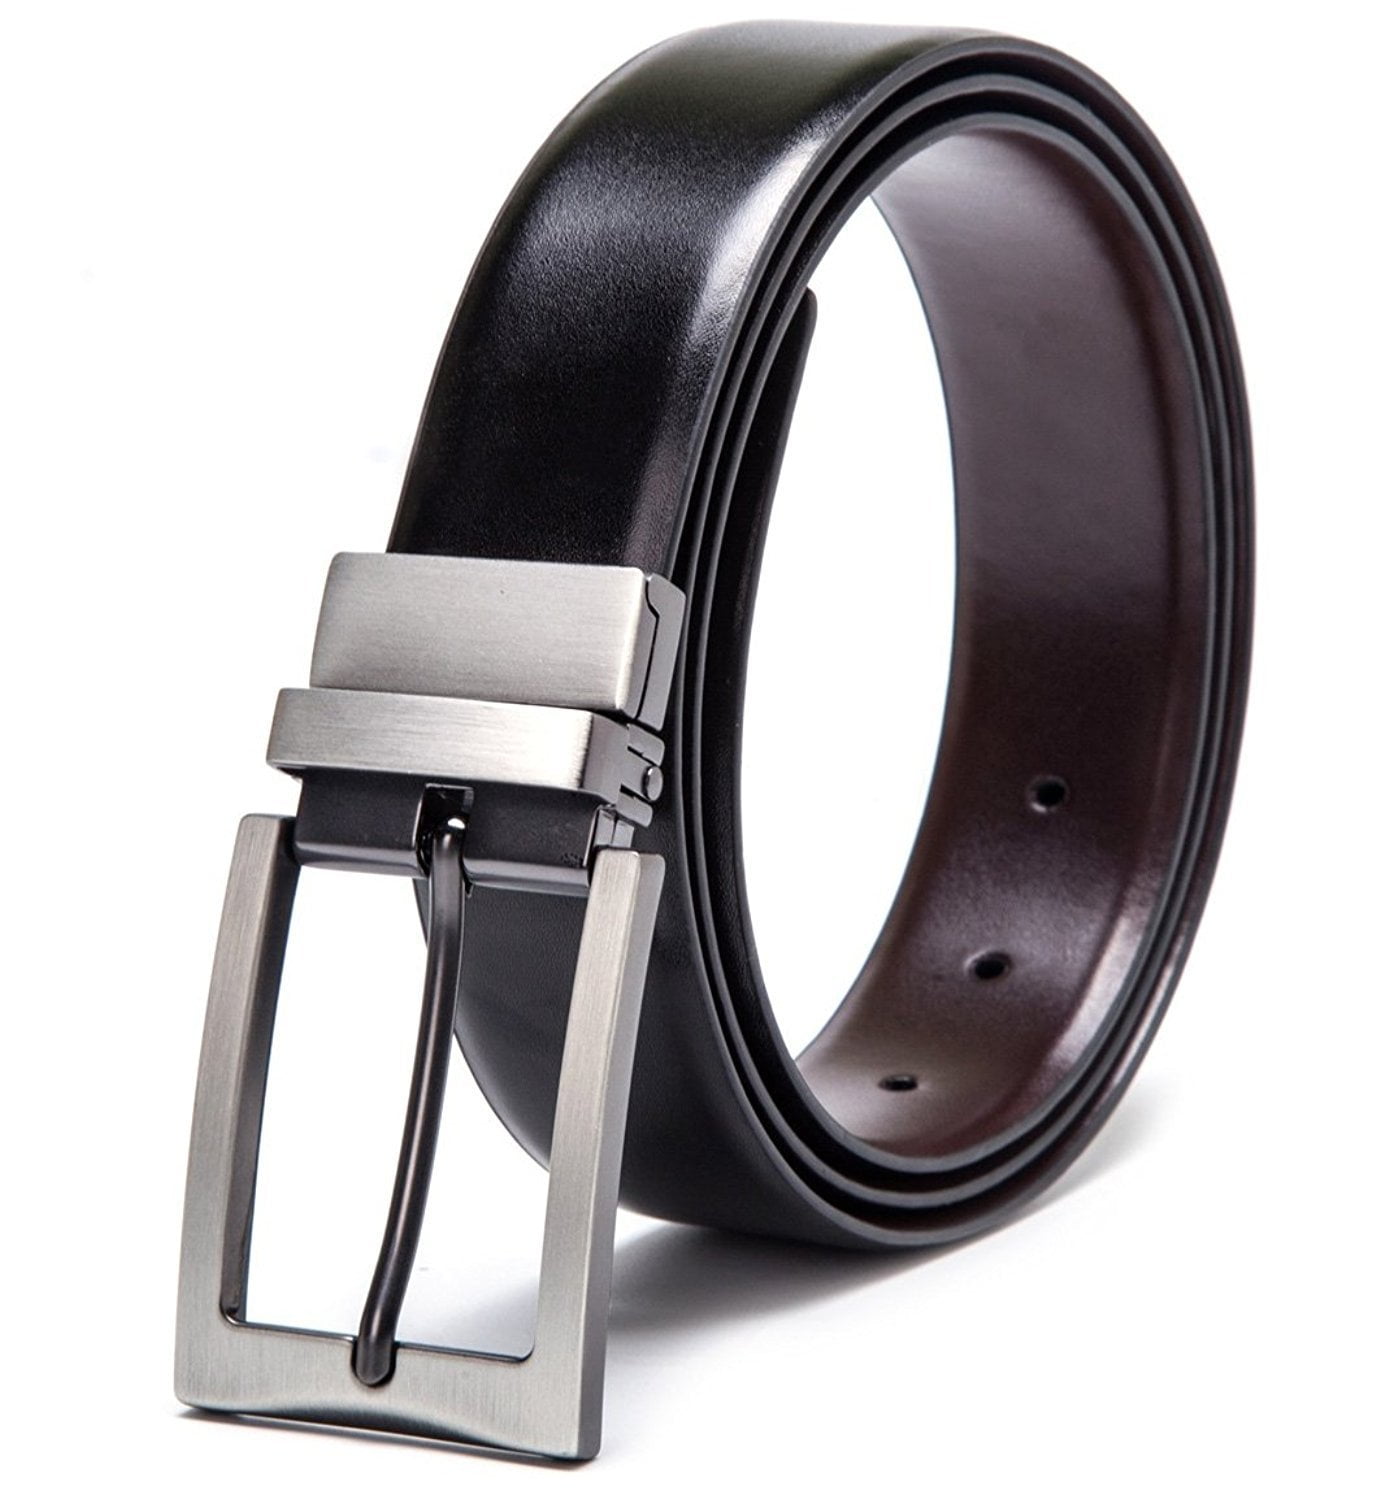 With Solid Automatic Buckle 1 1/4" Wide Aog Design Genuine Leather Dress Belt 